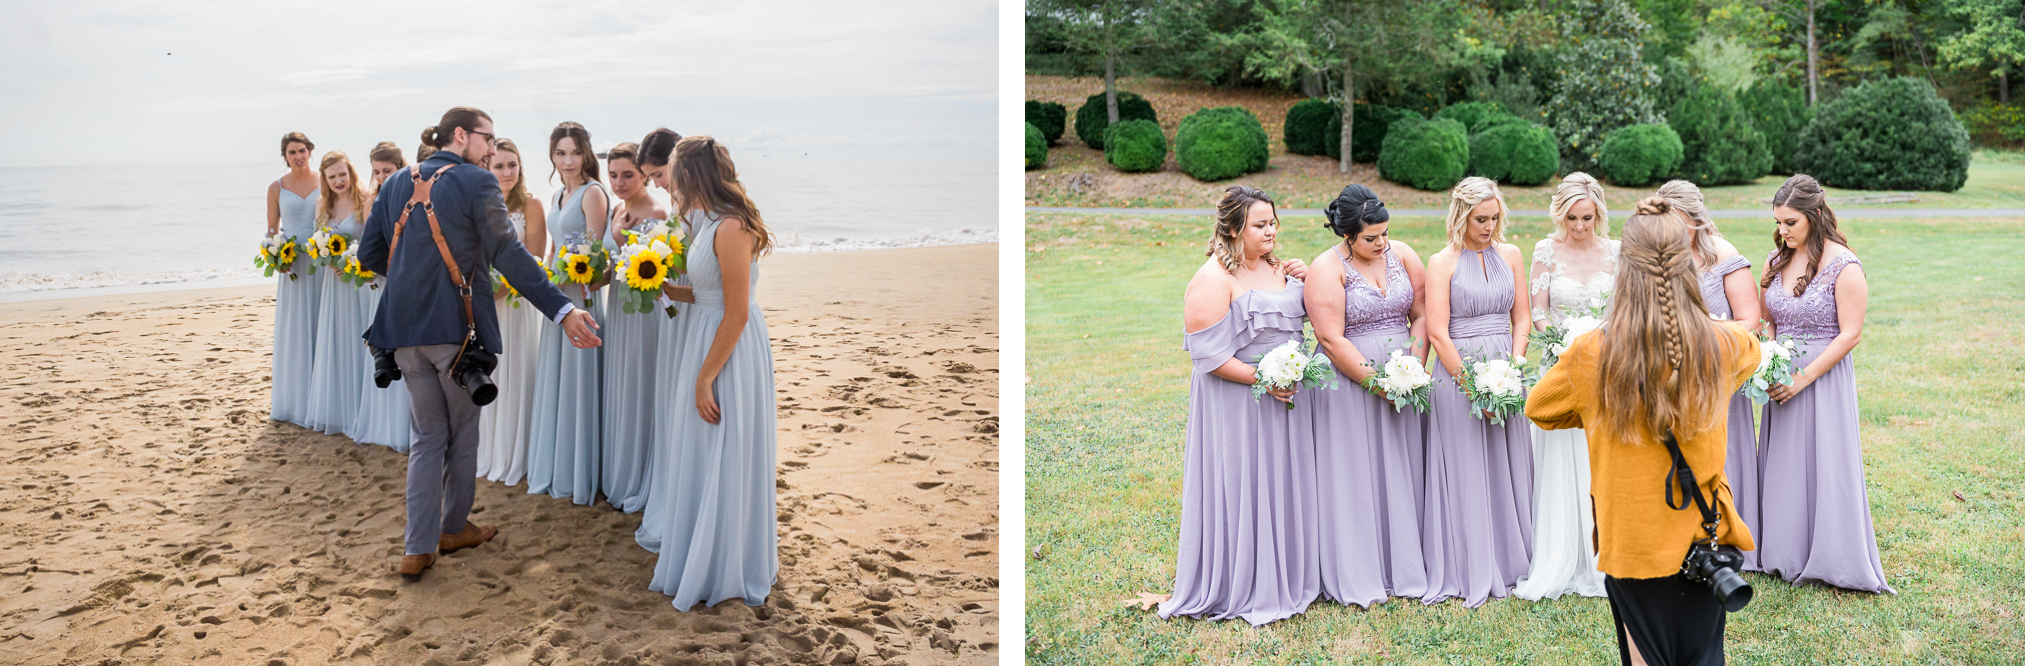 Behind the Scenes 2019 Wedding Photography - Hunter and Sarah Photography